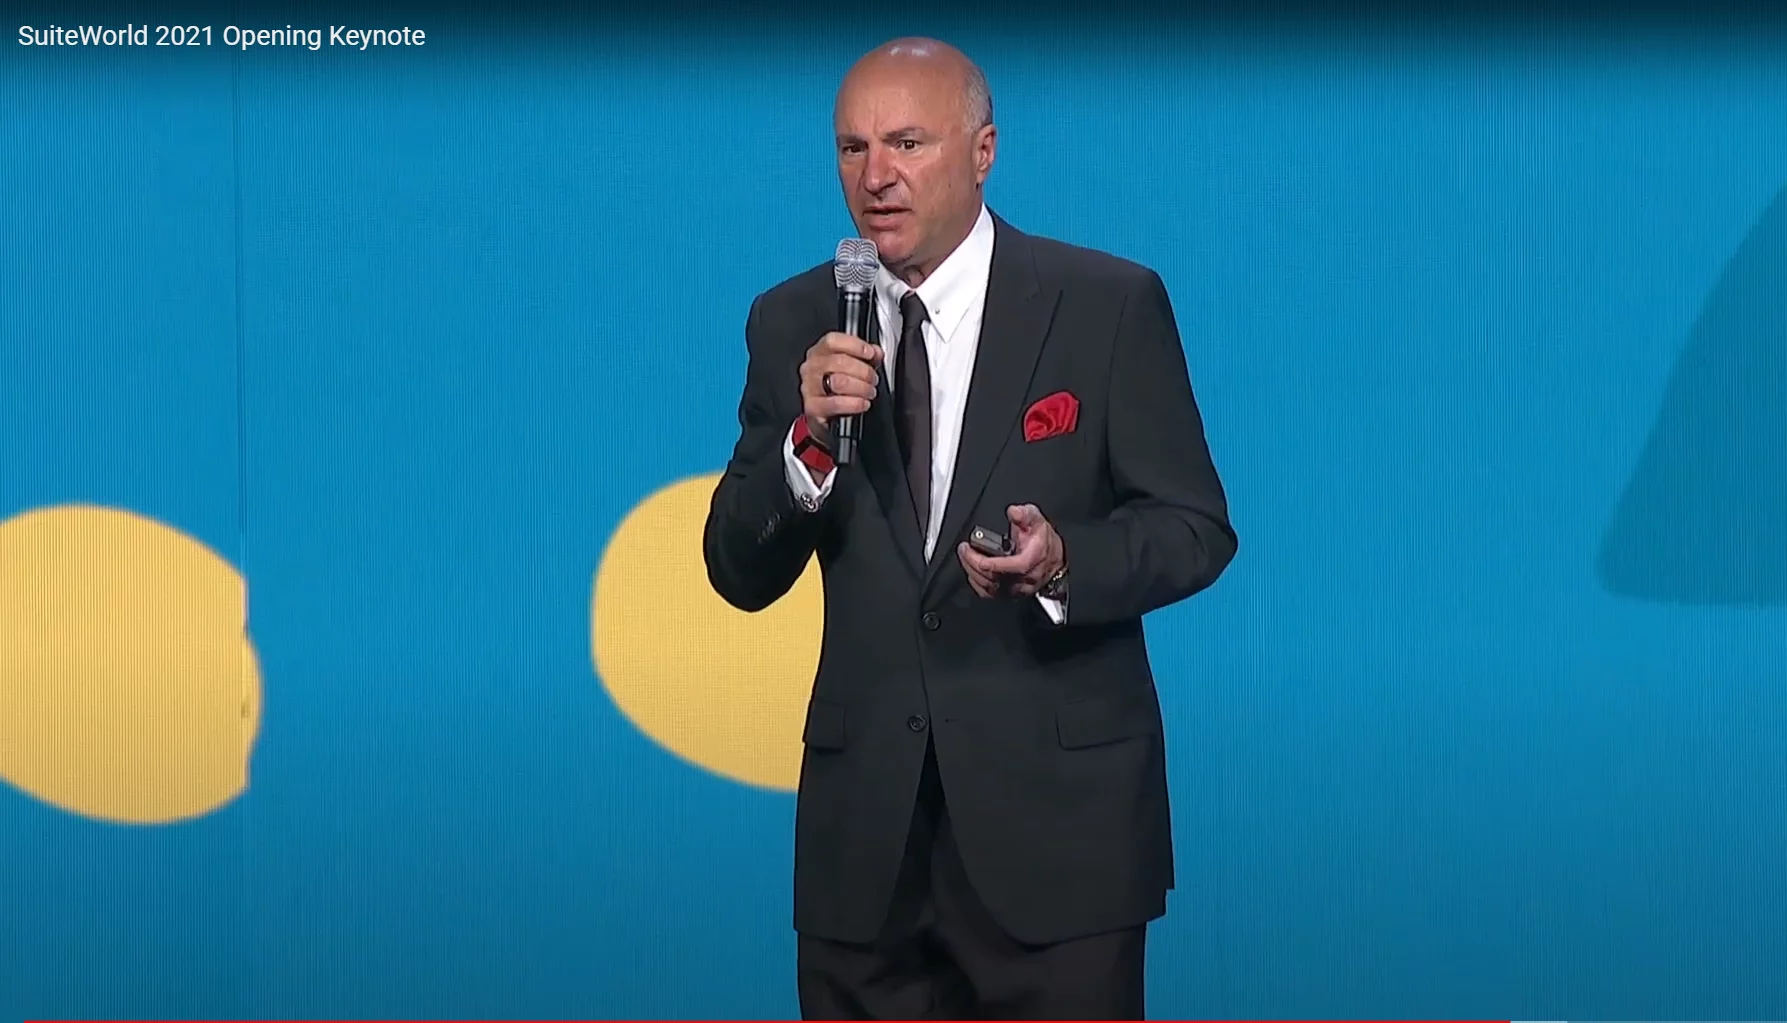 Mr. Wonderful - Kevin O'Leary, Entrepreneur and Author